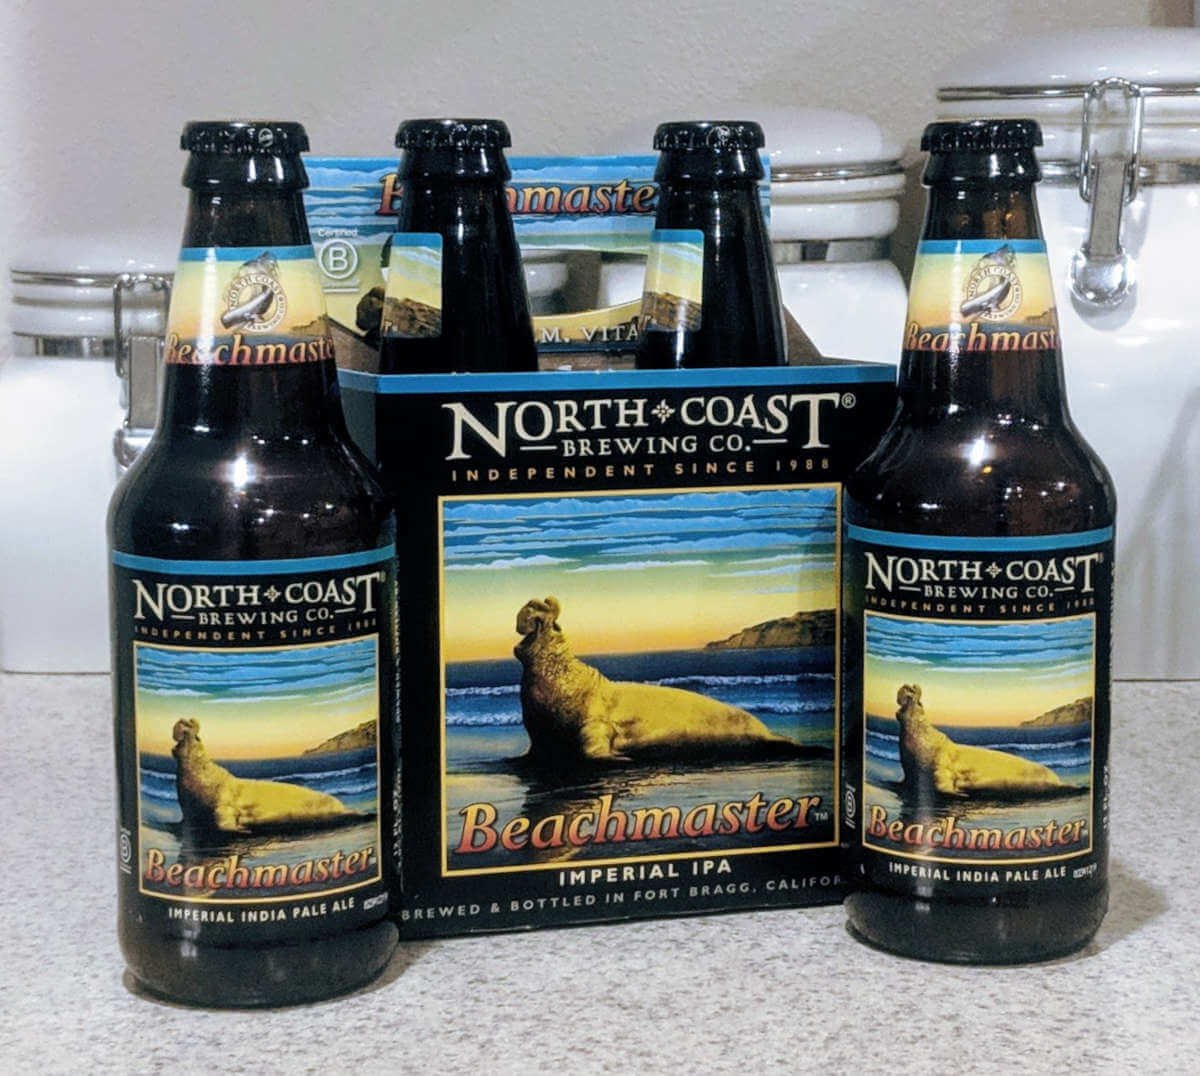 Received: North Coast Brewing Beachmaster Imperial IPA